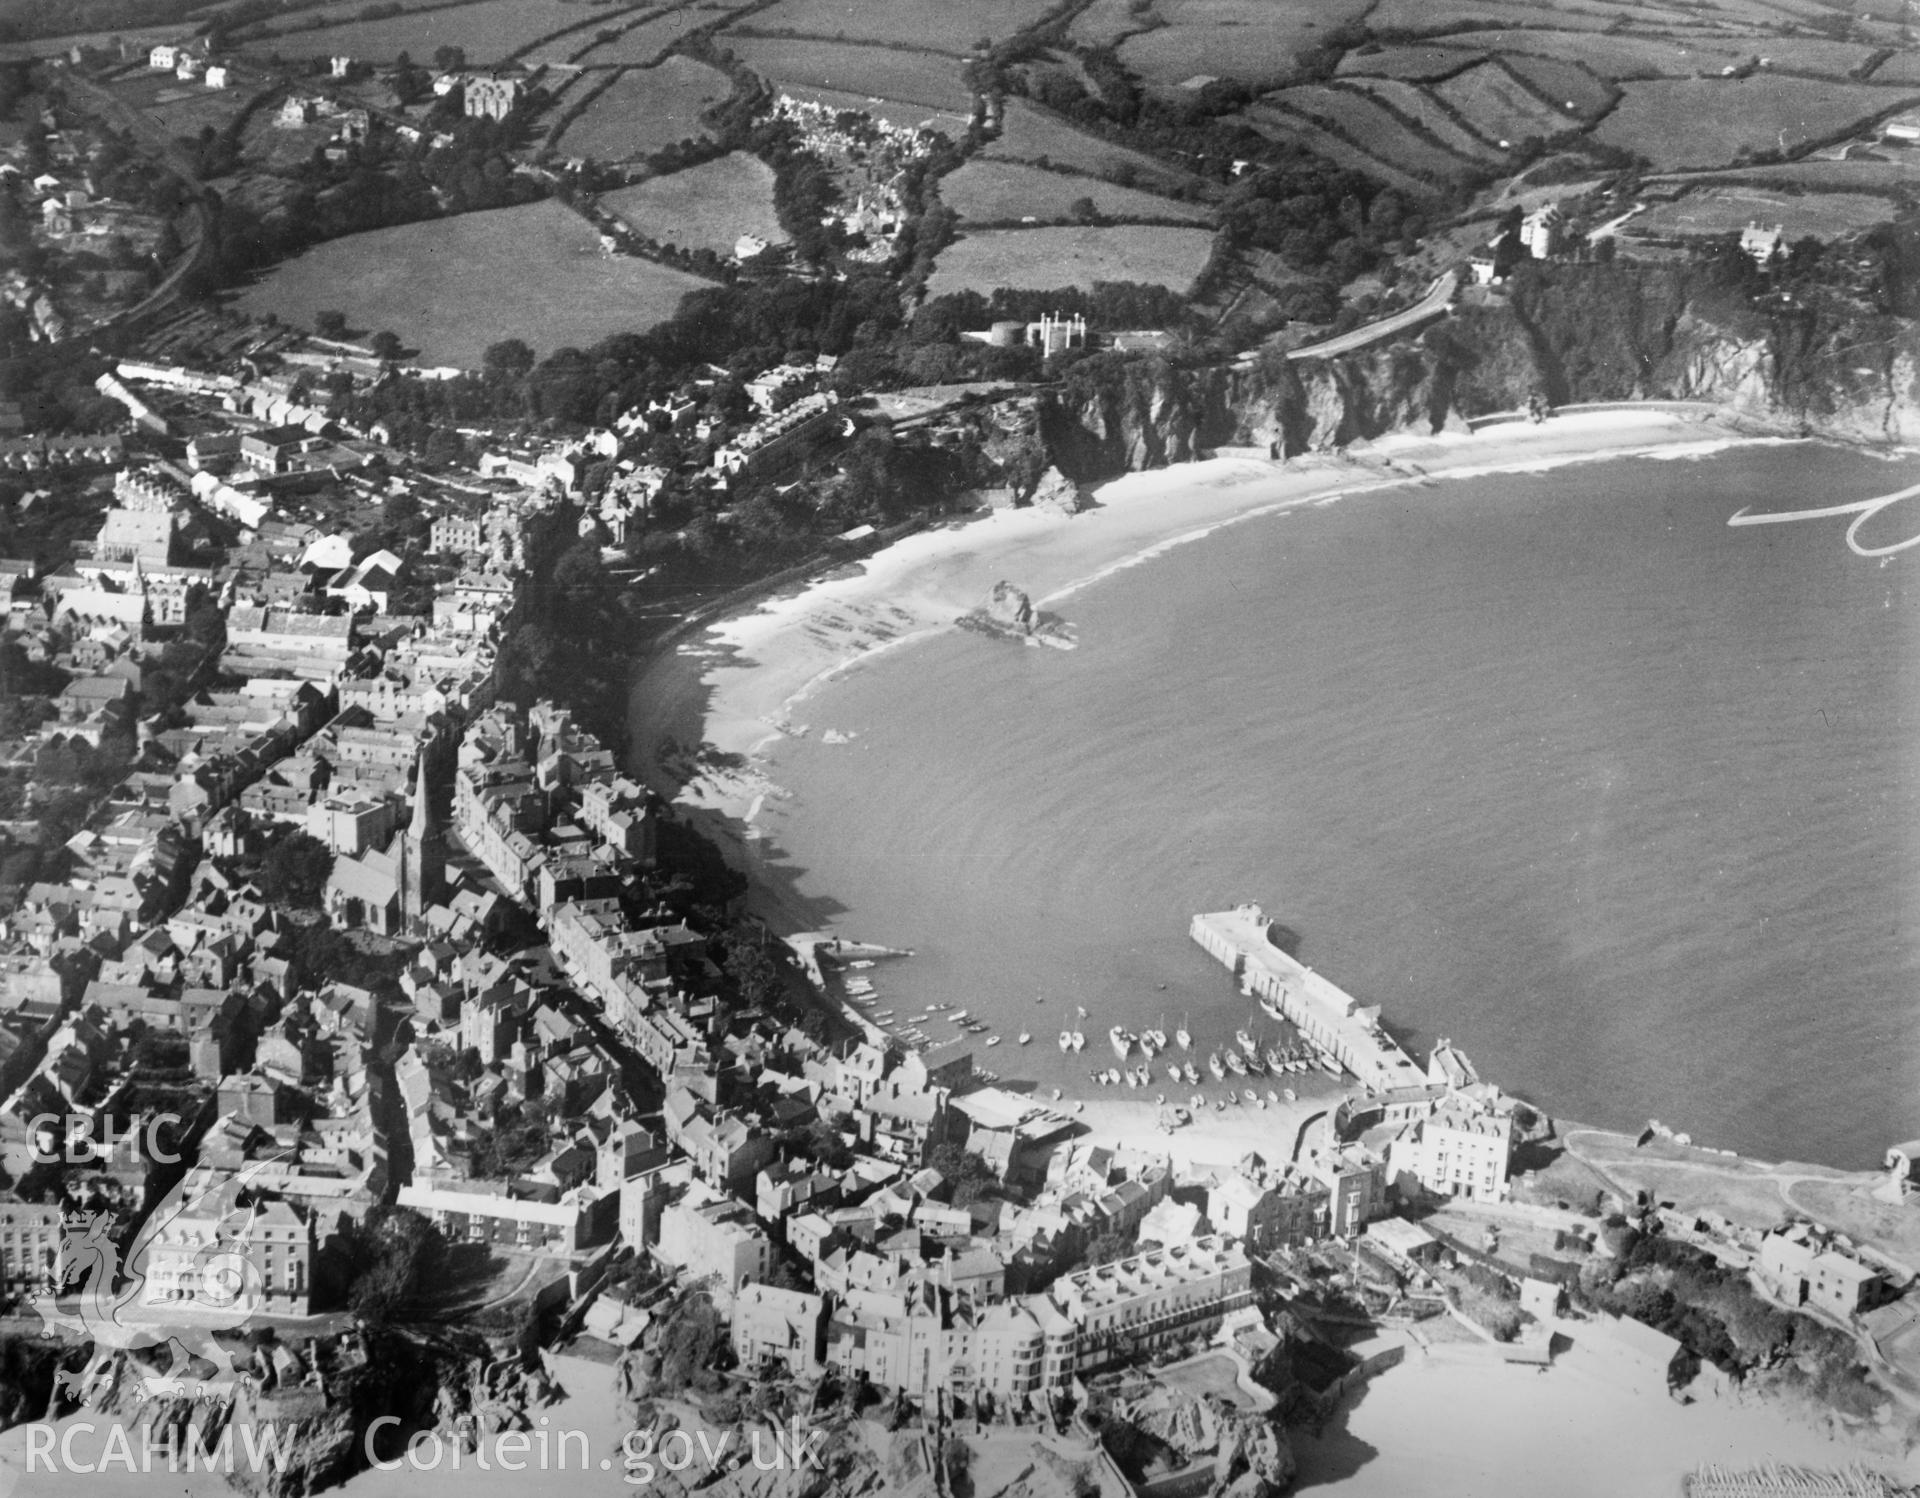 View of Tenby showing North Beach. Oblique aerial photograph, 5?x4? BW glass plate.